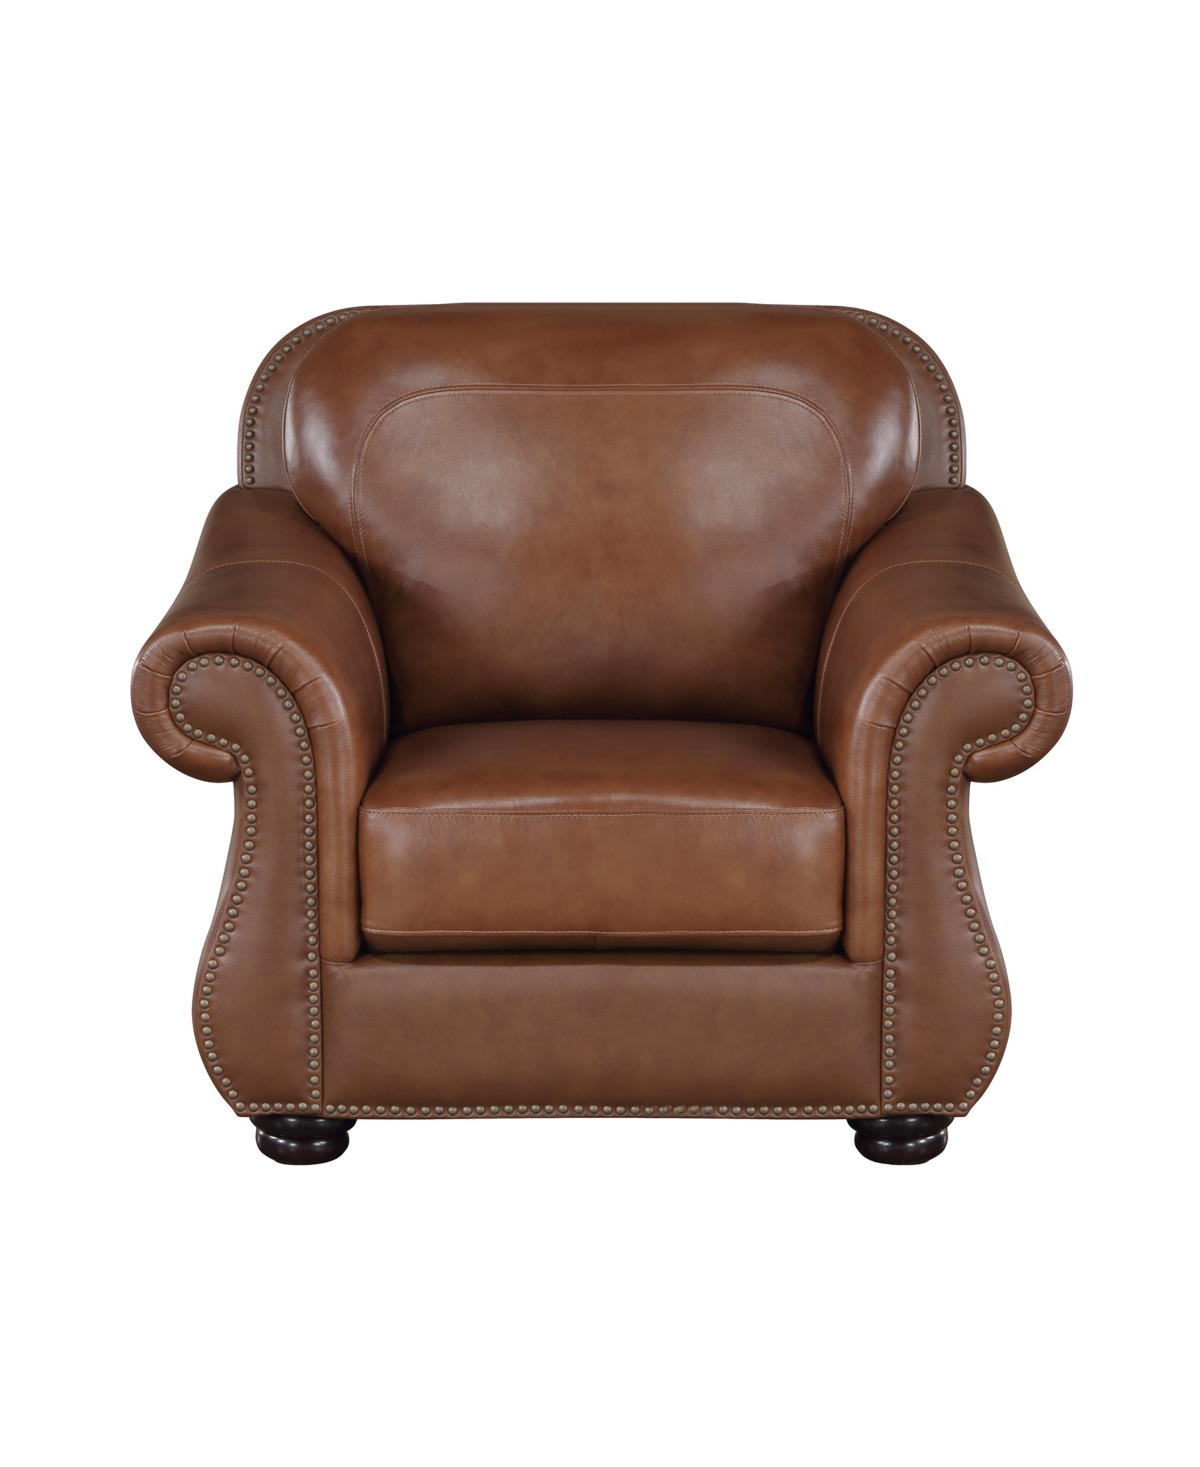 Shop Homelegance White Label Dadeville 42" Leather Match Chair In Camel Brown